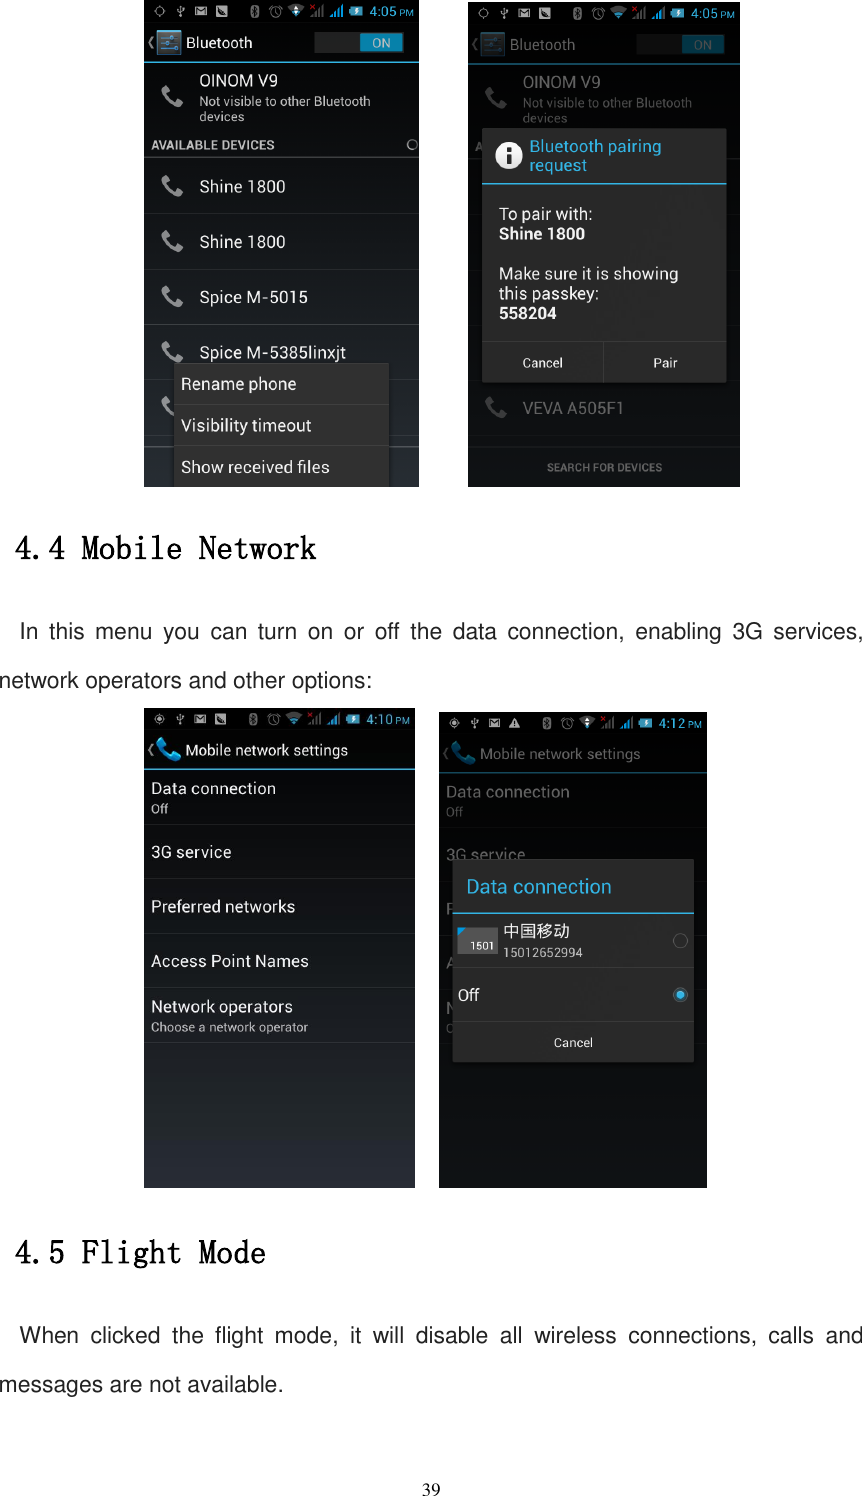   39     4.4 Mobile Network In  this  menu  you  can  turn  on  or  off  the  data  connection,  enabling  3G  services, network operators and other options:     4.5 Flight Mode When  clicked  the  flight  mode,  it  will  disable  all  wireless  connections,  calls  and messages are not available. 